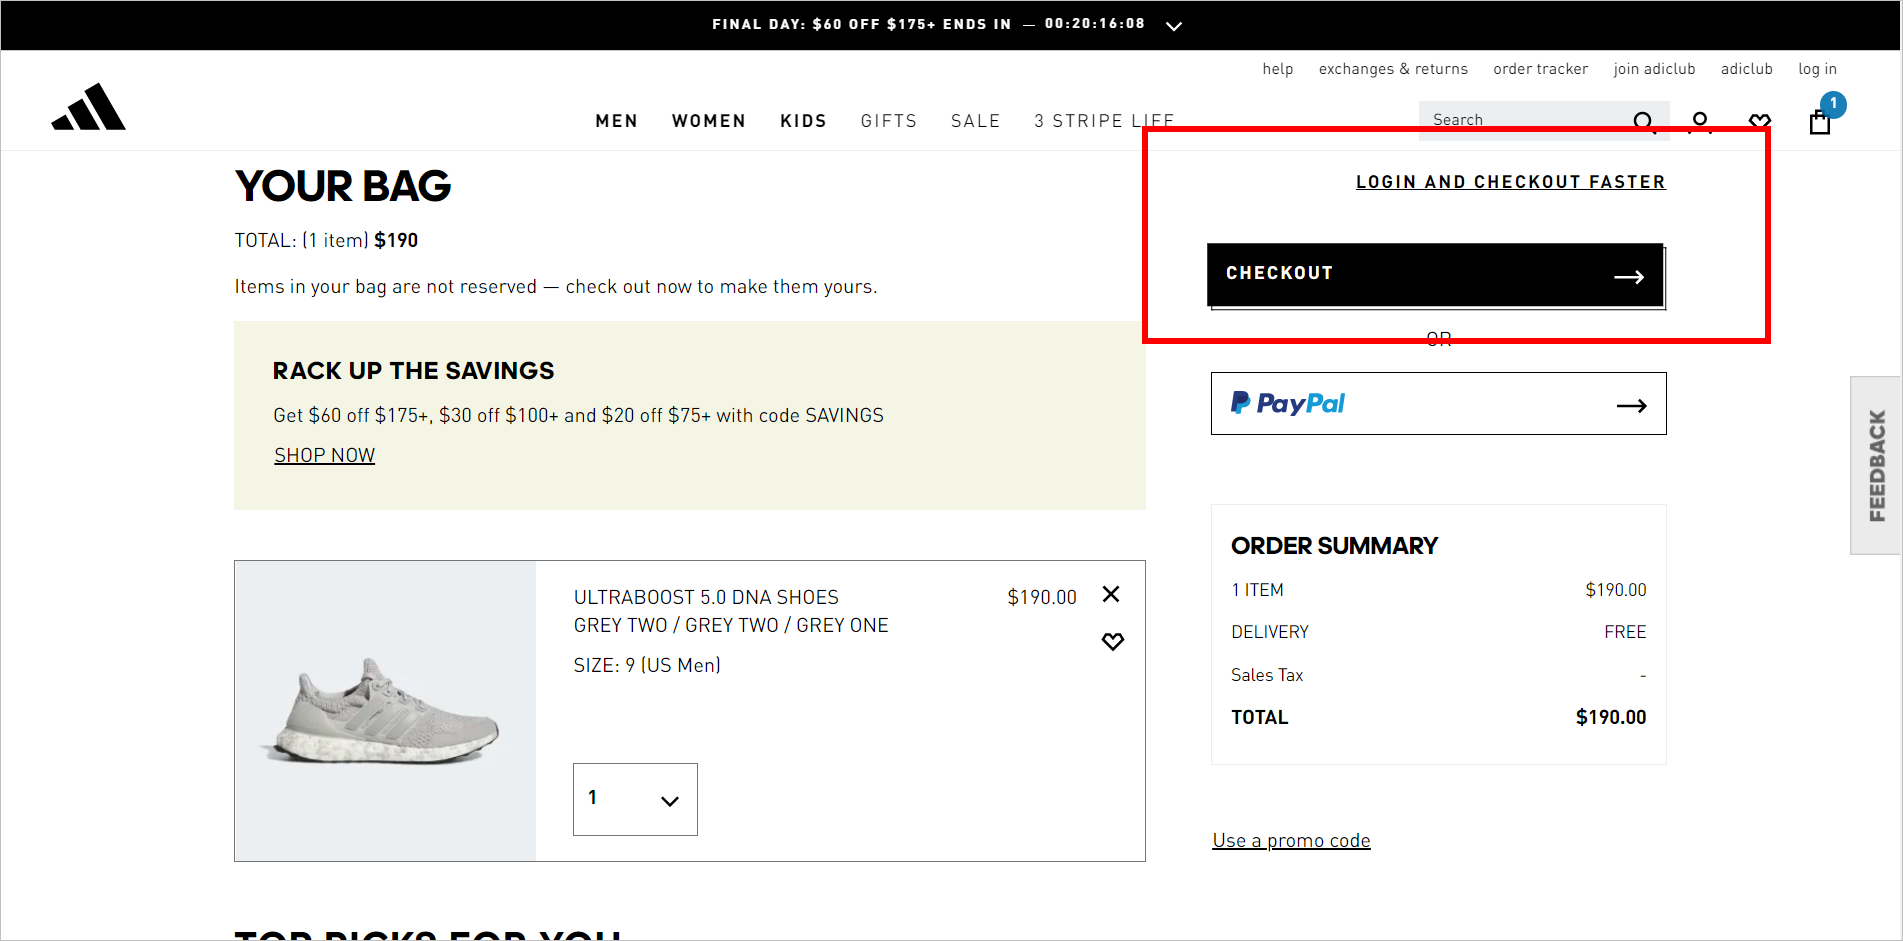 Adidas.com’s shopping bag with the added product on the left side and the checkout button and order total on the right